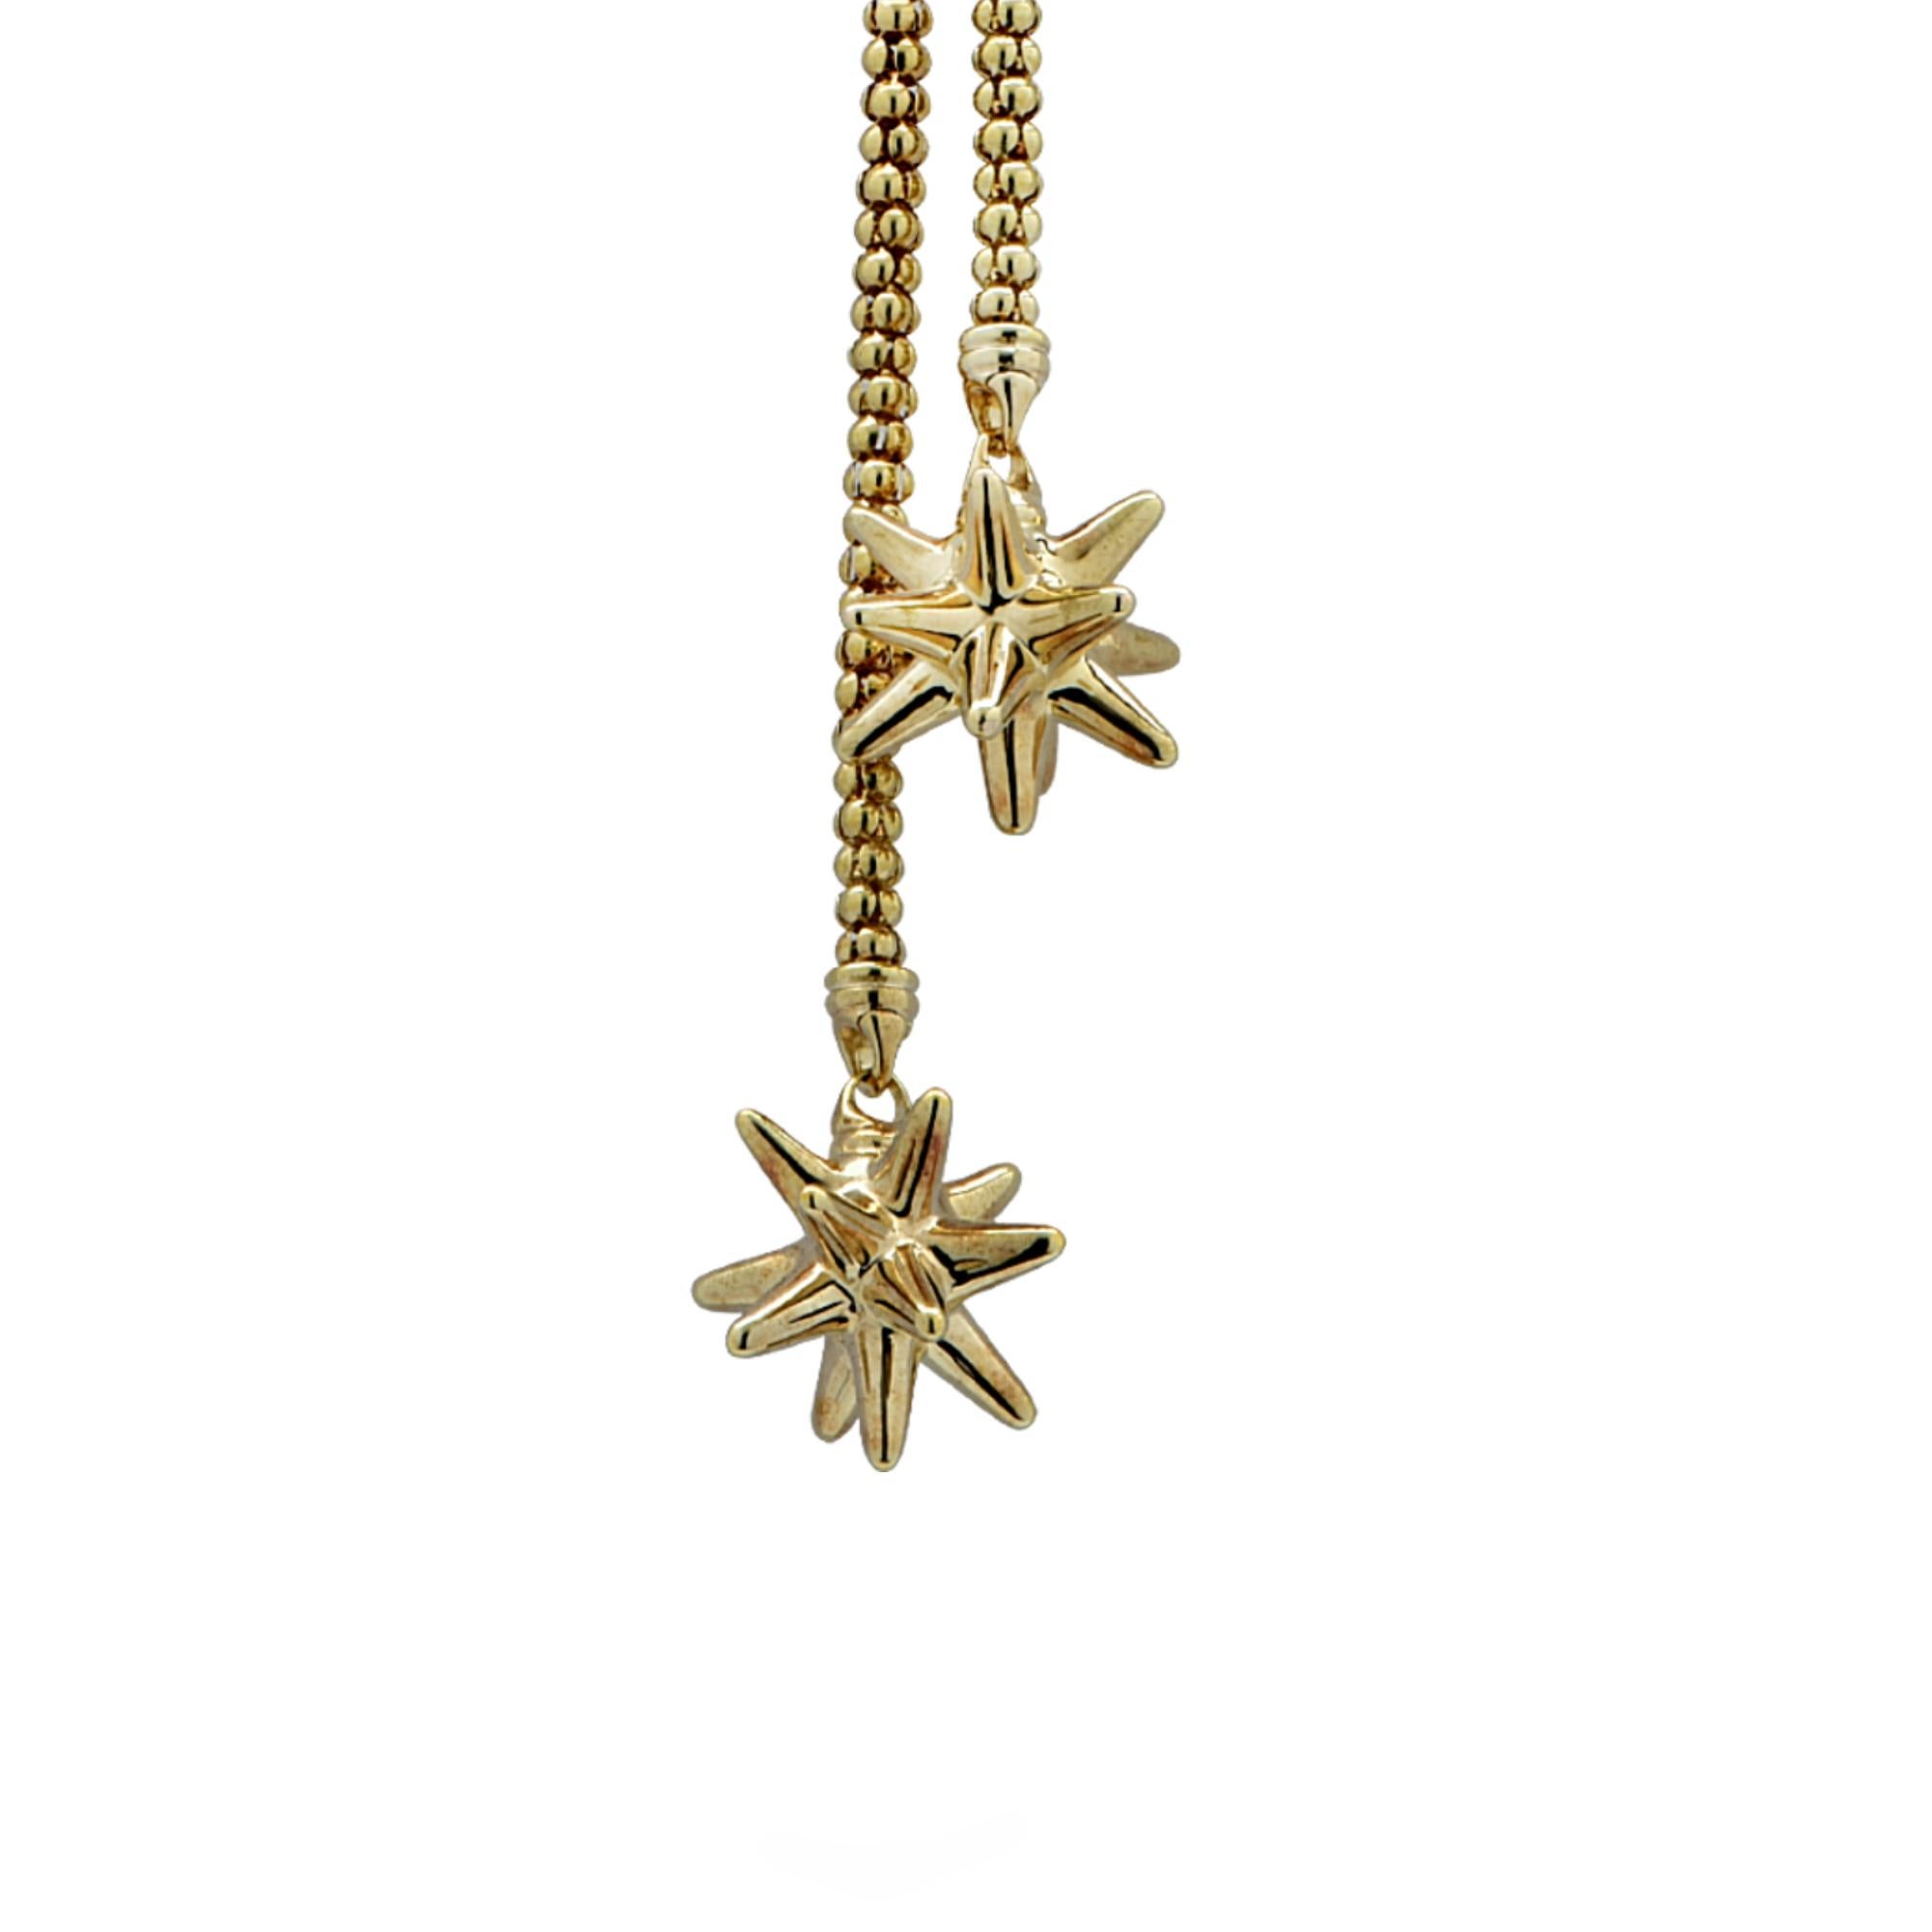 Exquisite adjustable lariat necklace crafted in yellow gold measuring 28 inches in length. This simple, but elegant necklace features a gold beaded necklace with gold starbursts on both ends, threaded through a secure clasp which allows you to